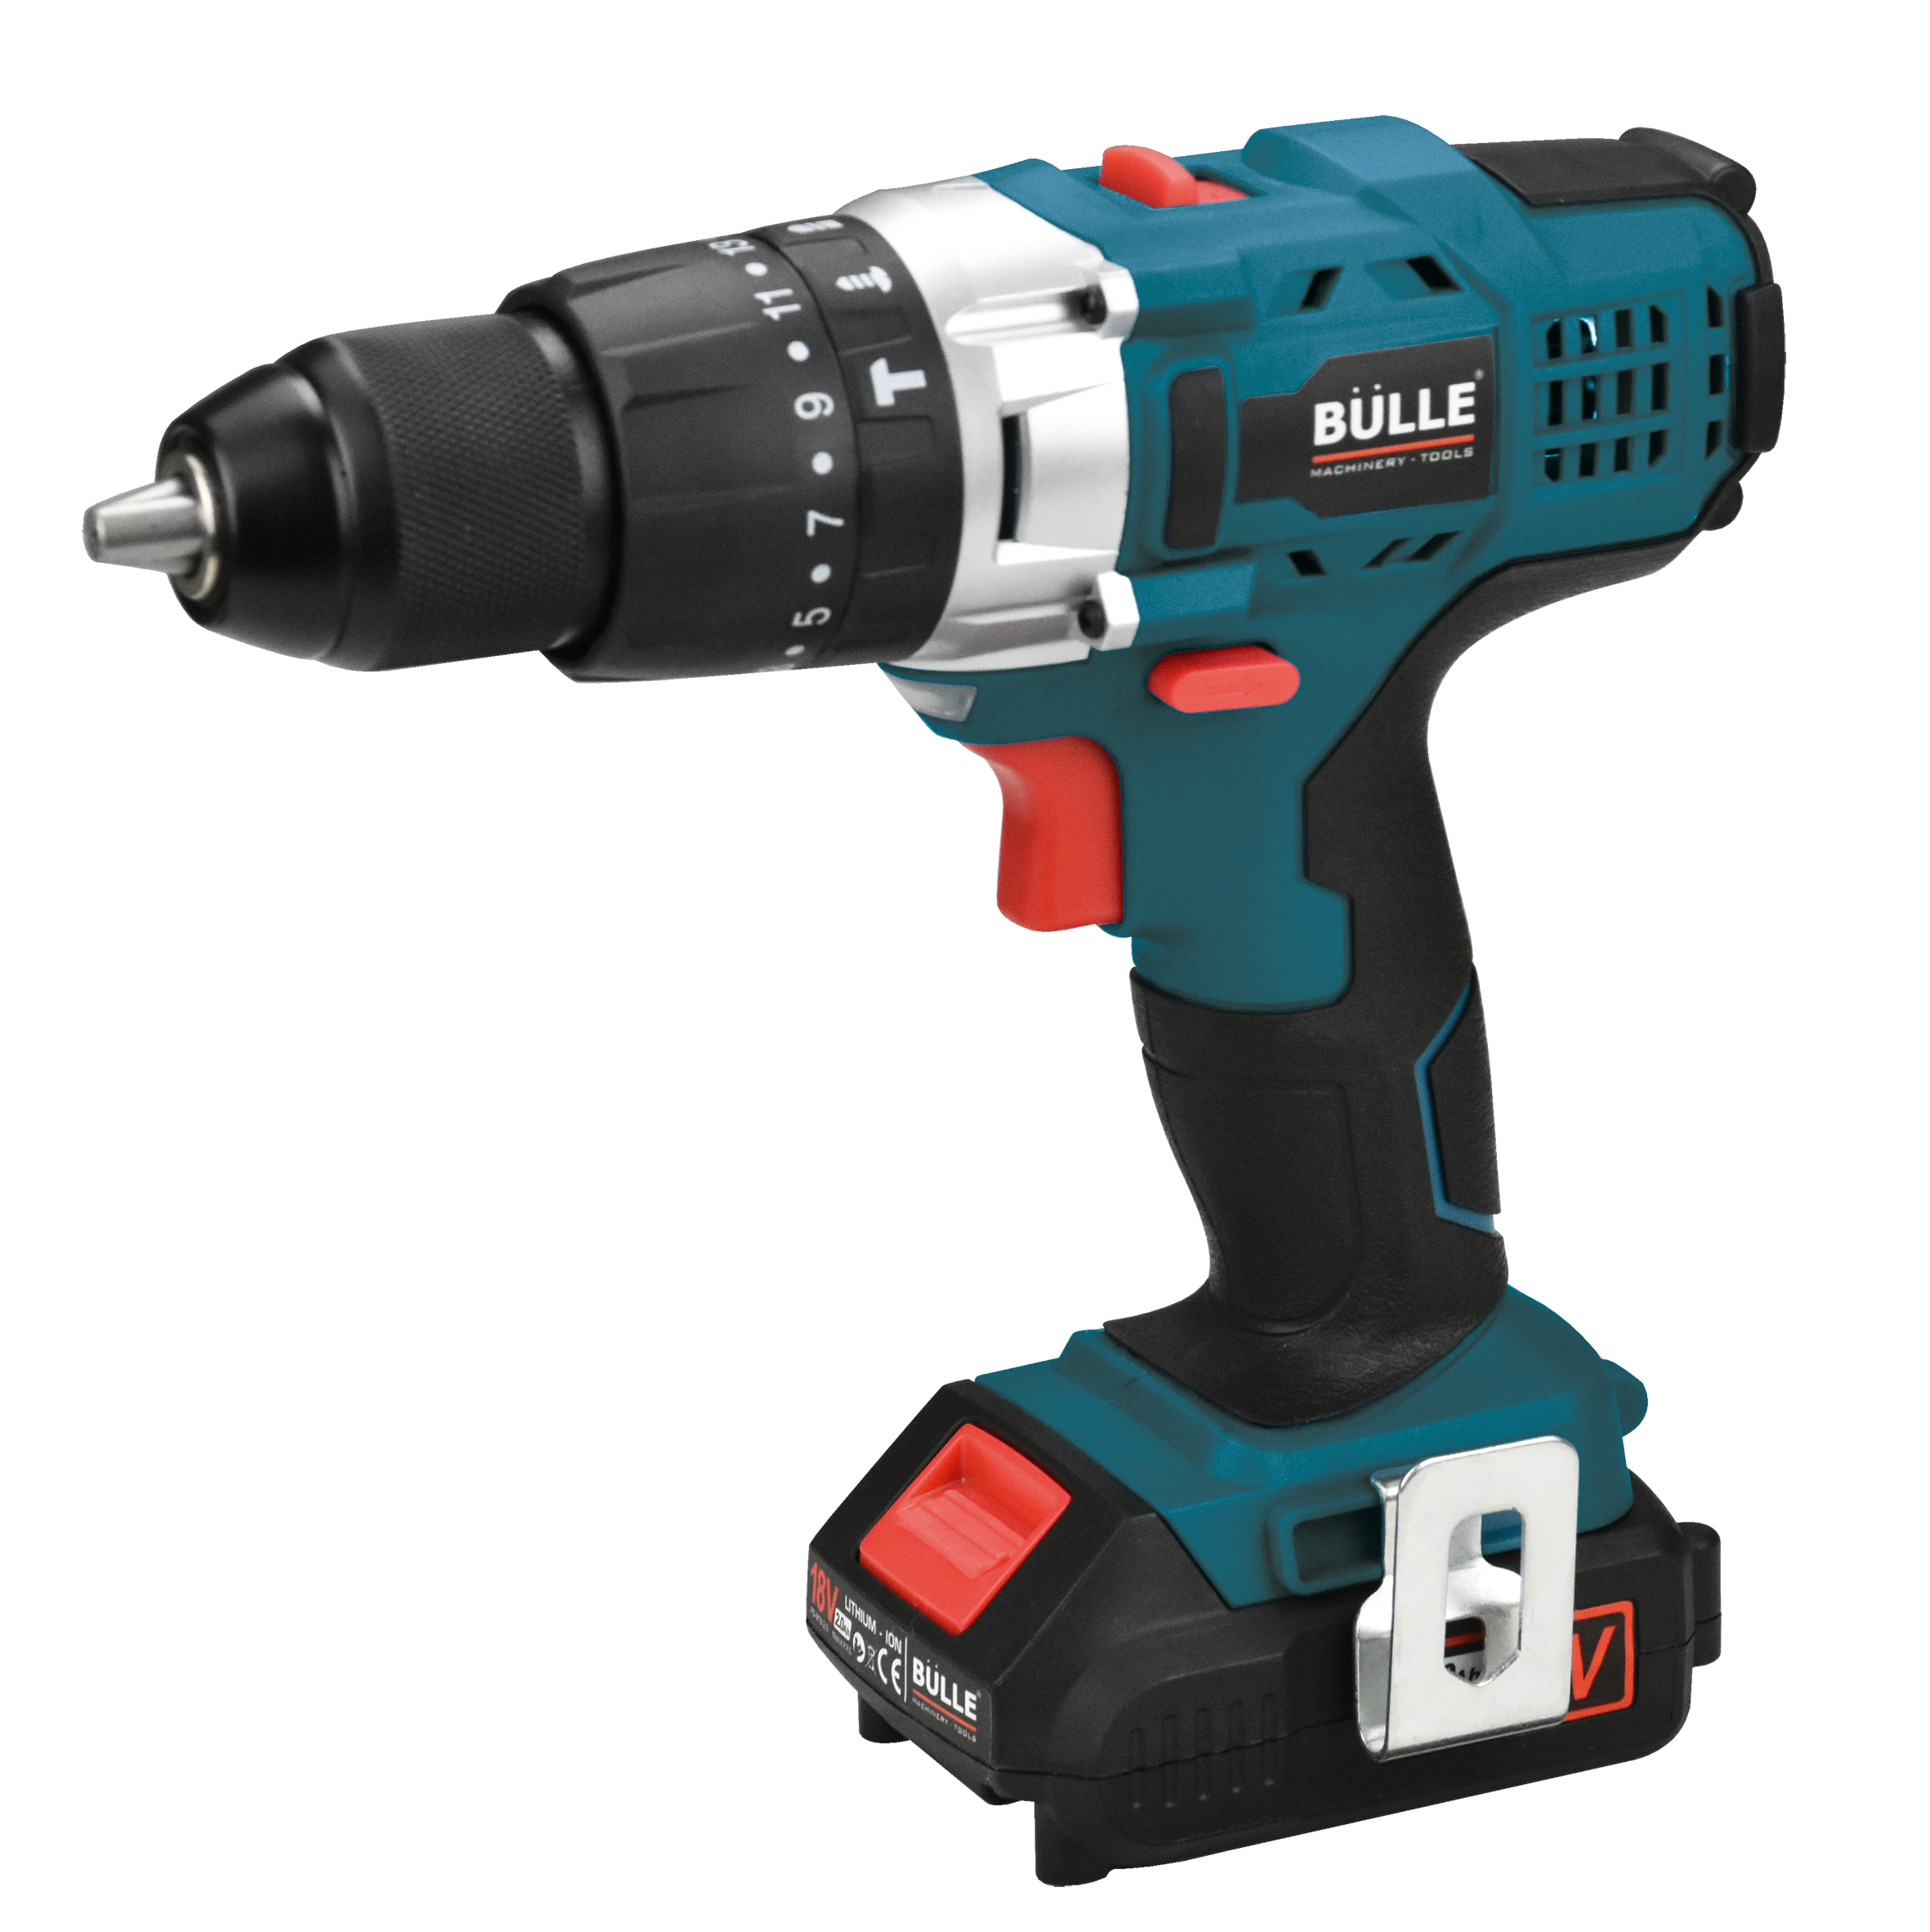 2-Speed Lithium Percussion Drill 18 V 1 x 2.0Ah Bulle - 2